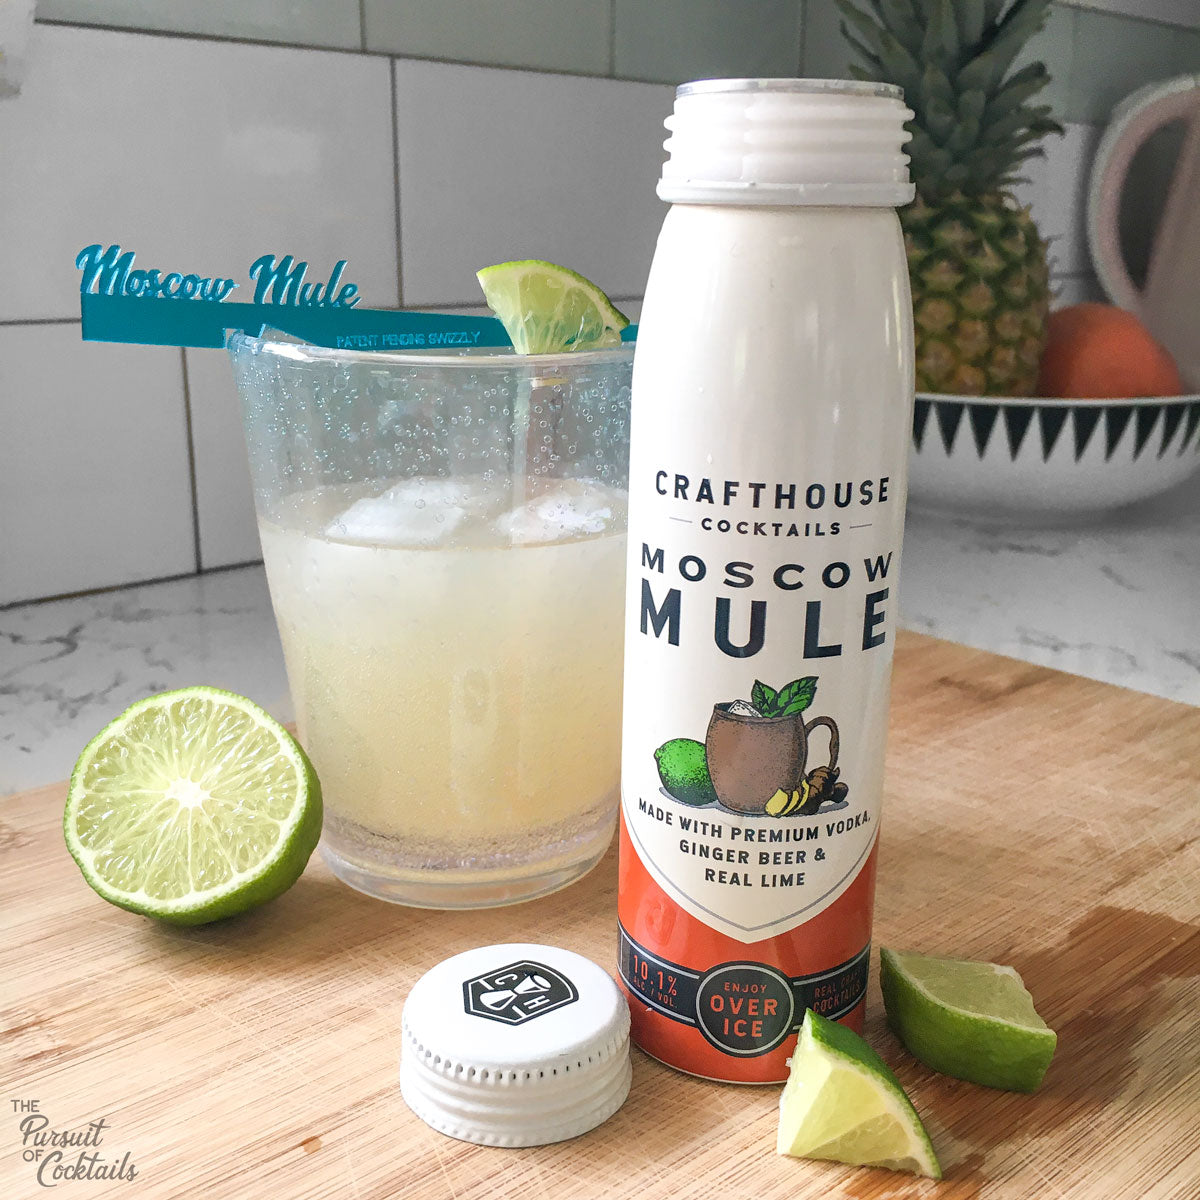 Ready to drink Crafthouse Cocktail Moscow Mule review